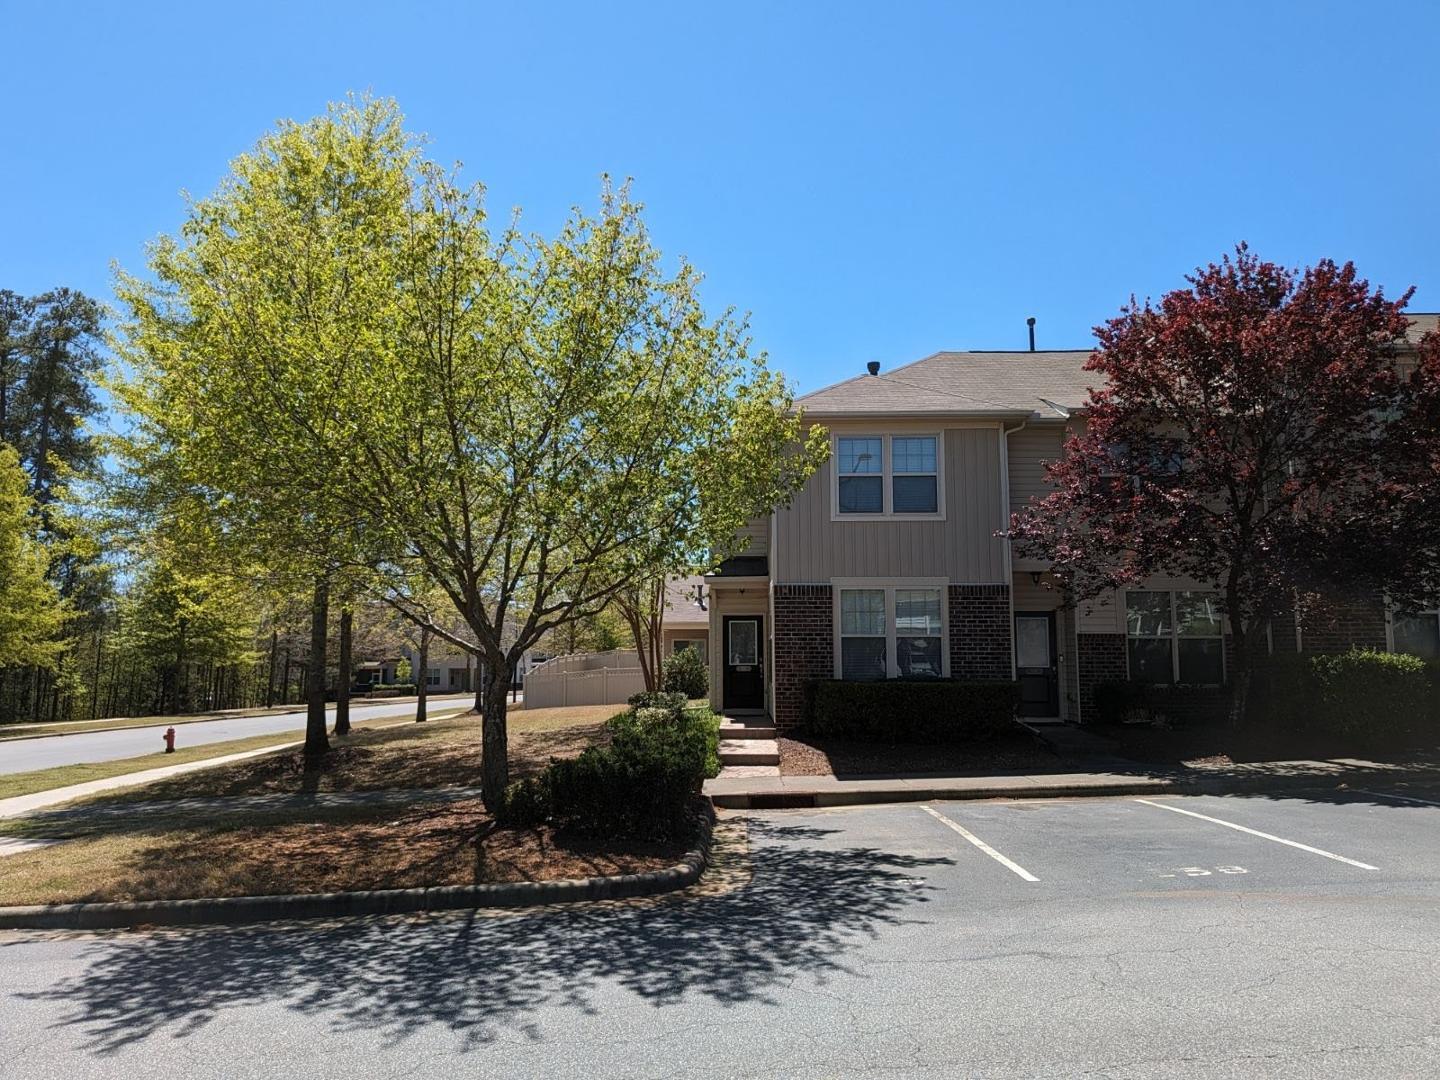 View Durham, NC 27705 townhome